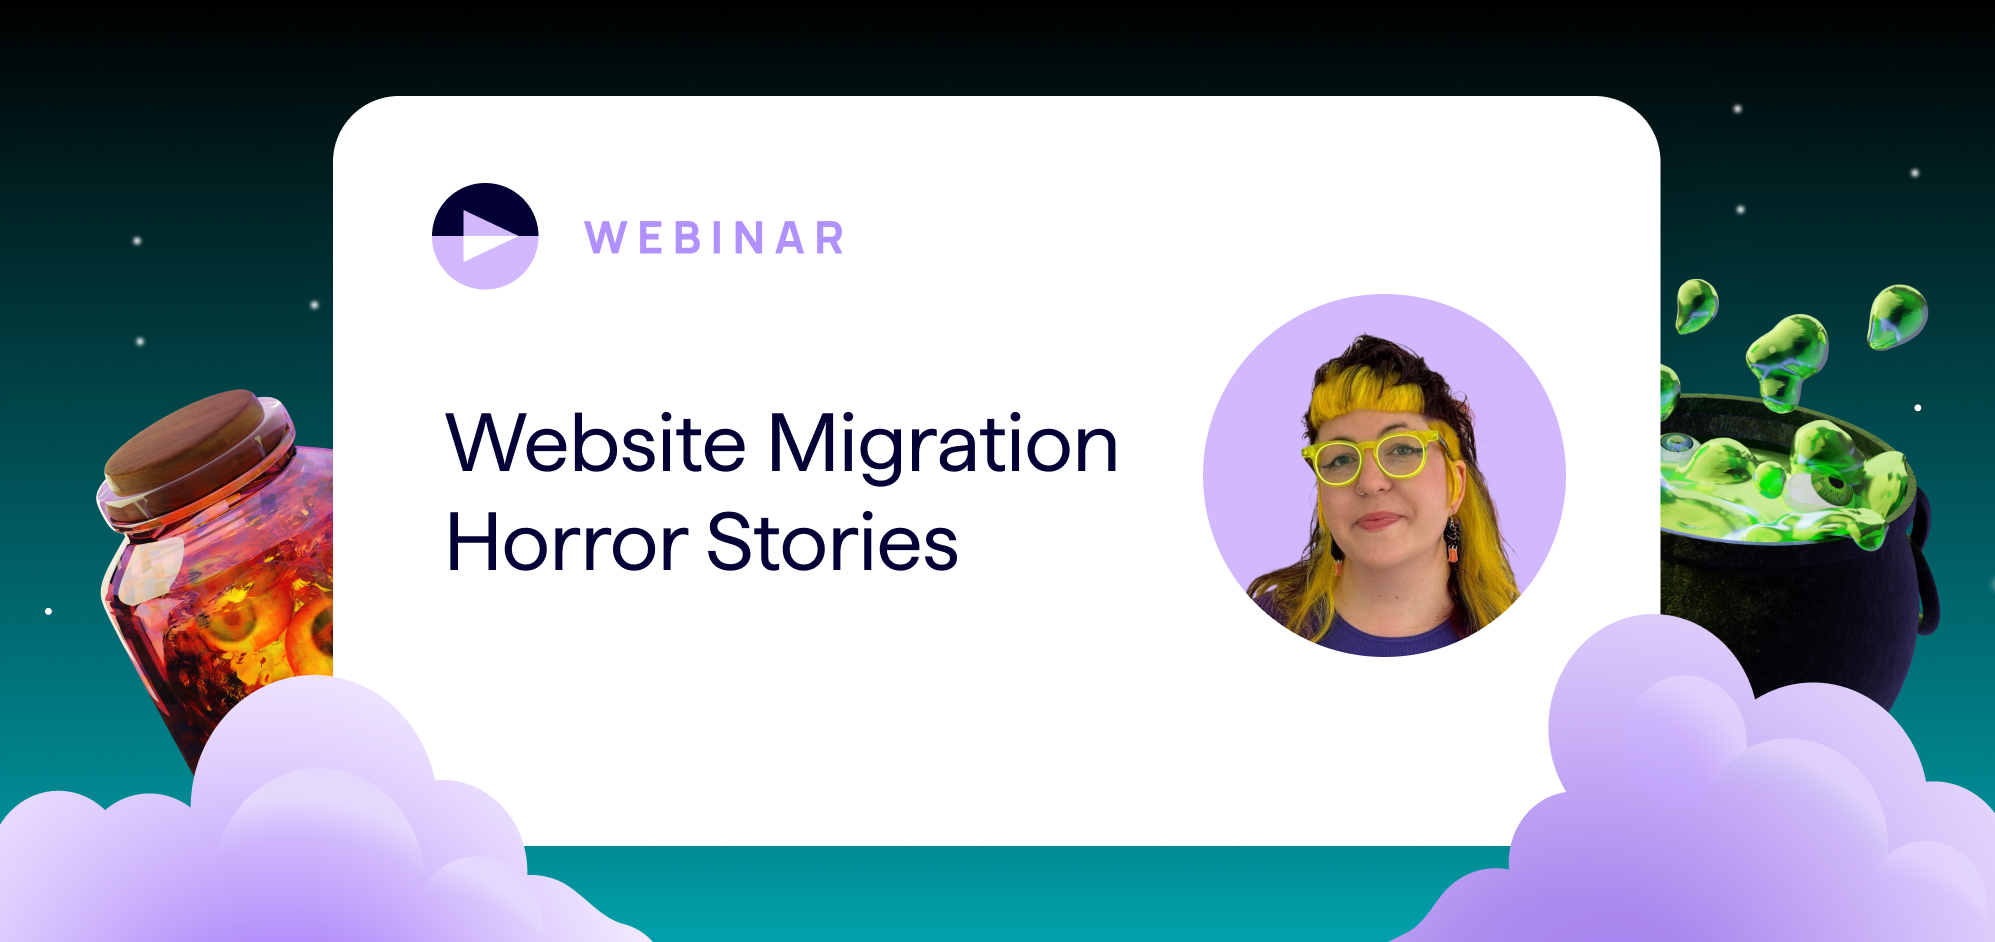 SEO Webinar - SEO Website Migration Horror Stories and Survival Guide - Featuring Technical SEO Director Sophie Gibson